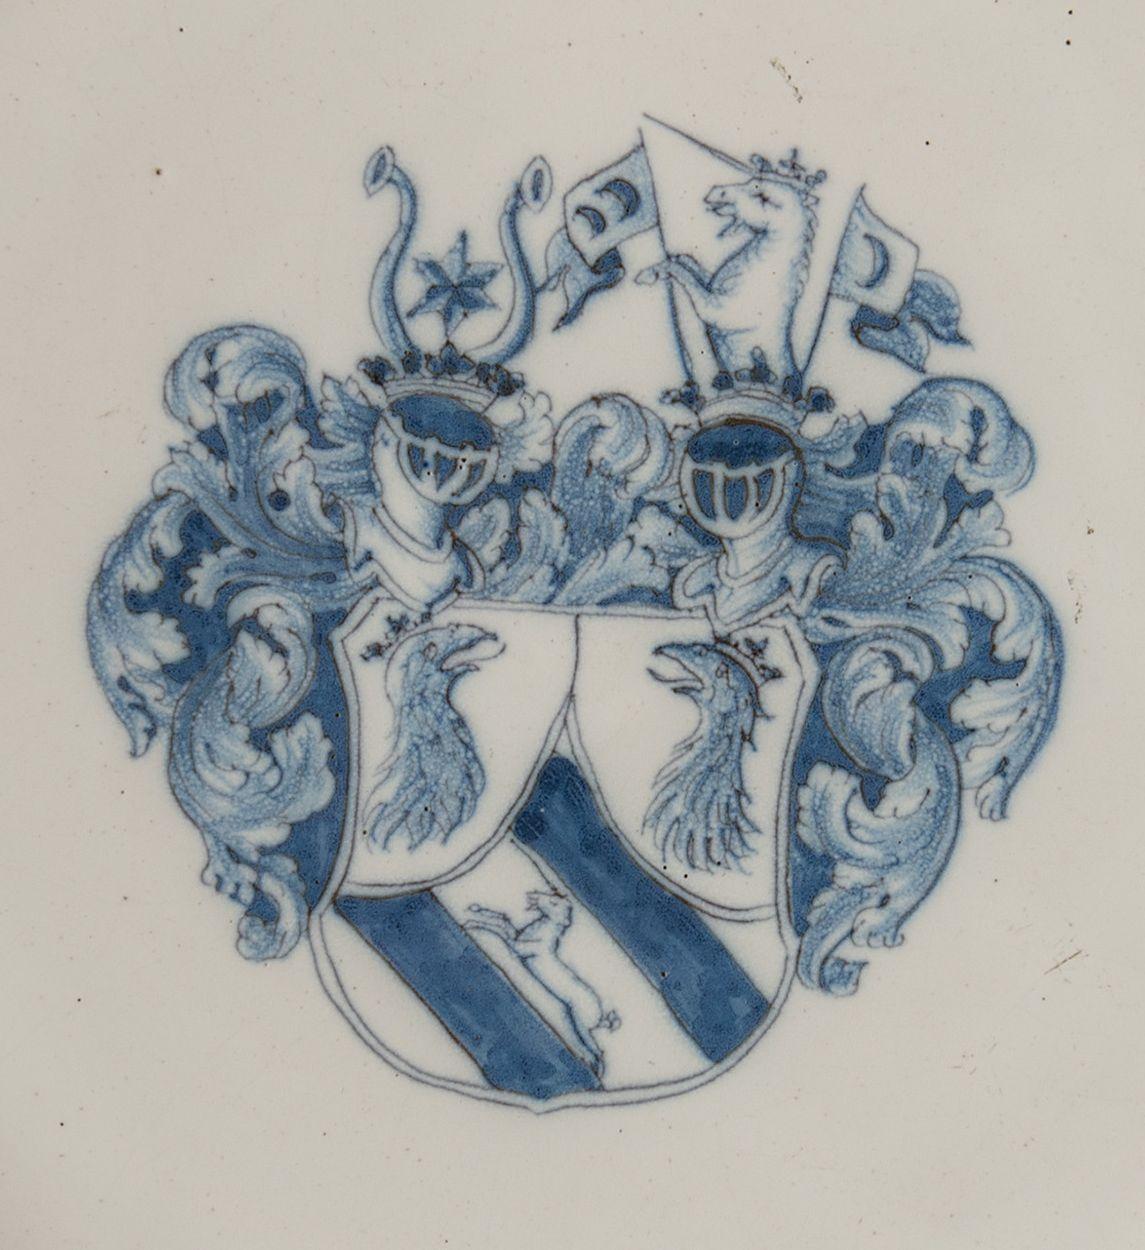 Blue and white armorial charger. Delft or Haarlem, 1650-1680

This large charger has a wide-spreading flange and is decorated in the center with a coat of arms in blue, made up of a shield adorned with two helmets and mantle. The shield is divided